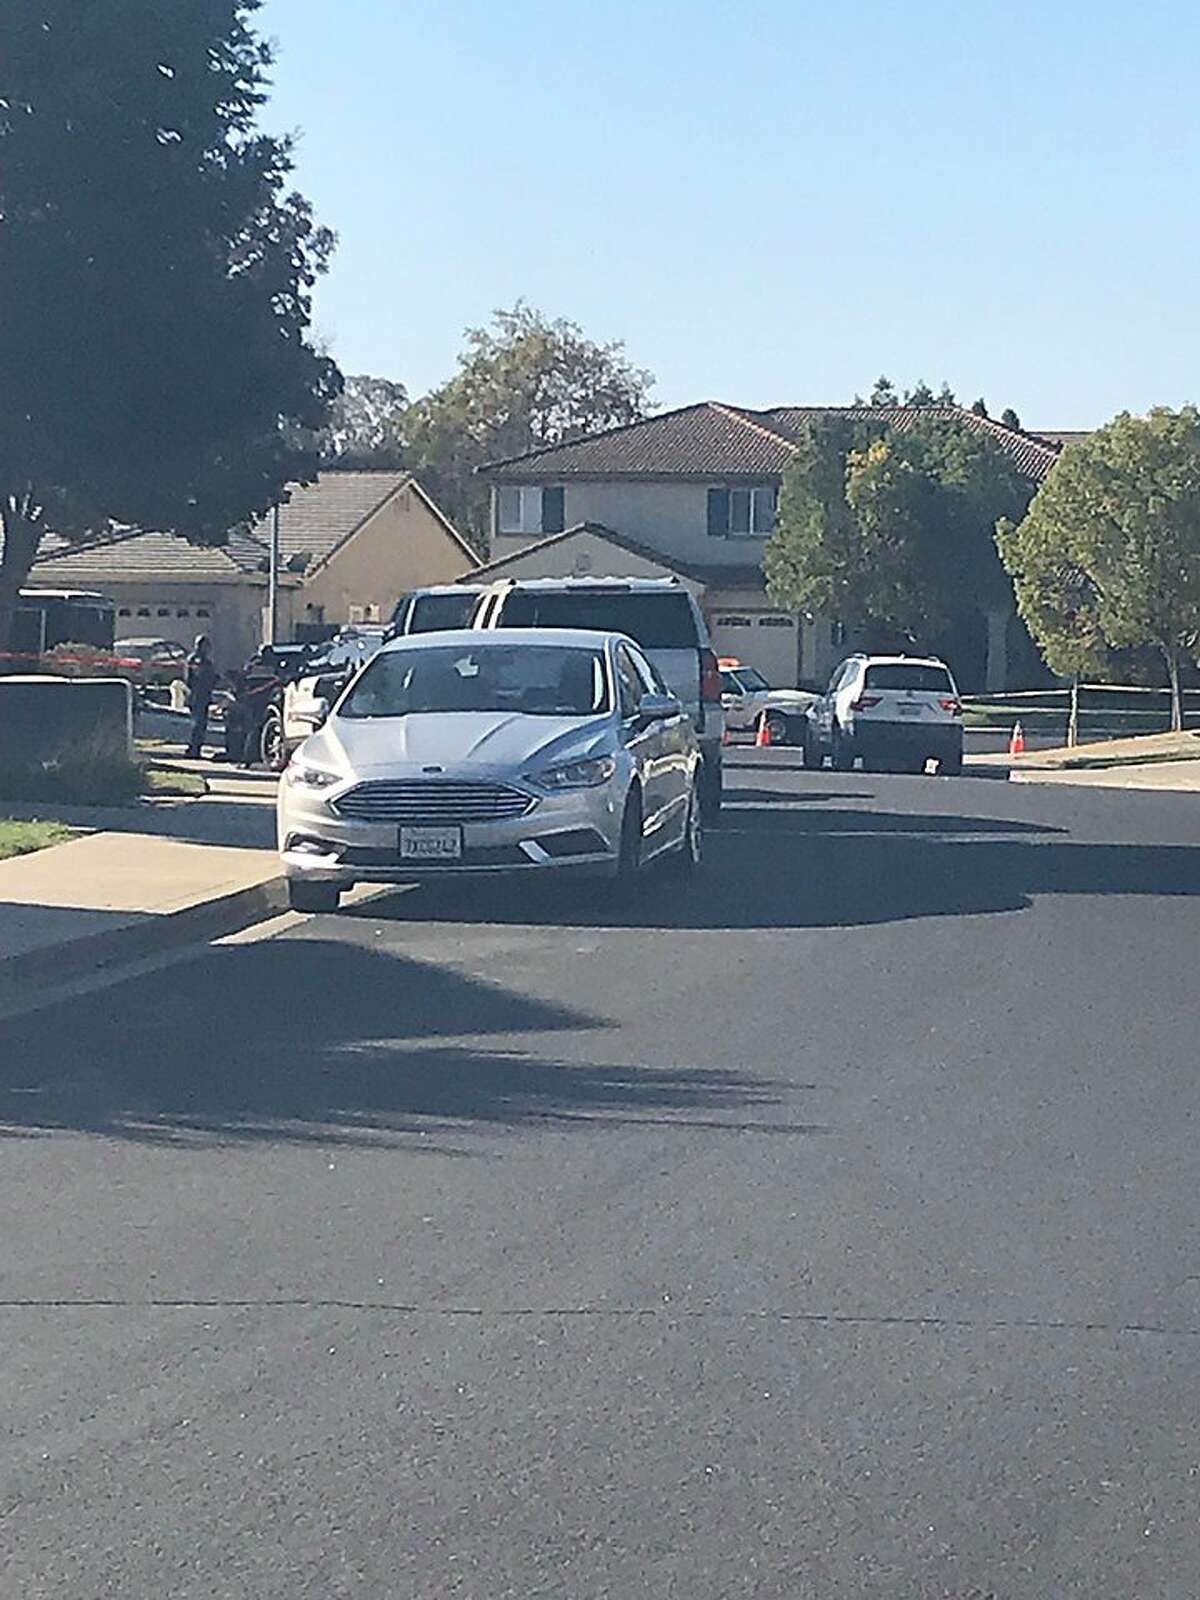 Police conducted a homicide investigation at a Vacaville home on Thursday, Oct. 31 after a son allegedly stabbed his mother to death.